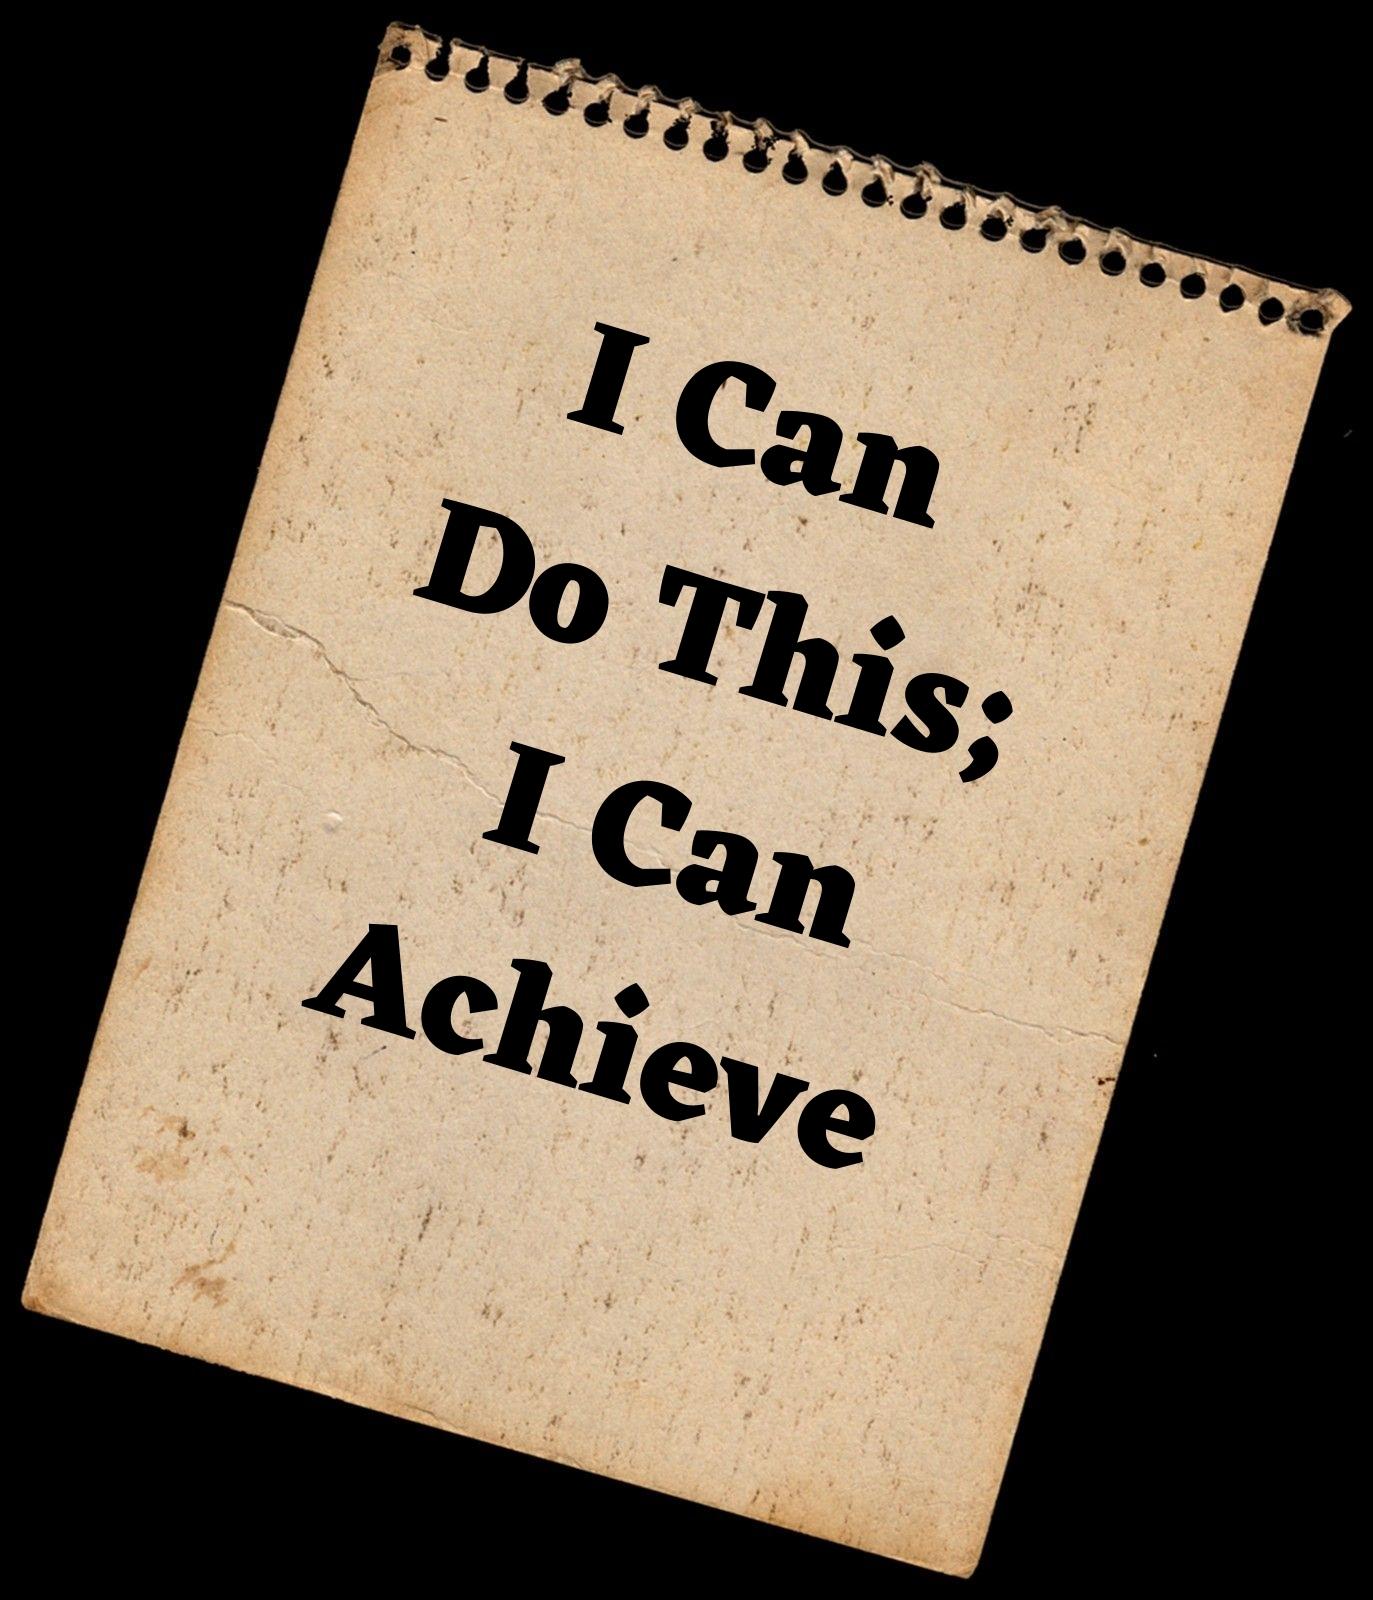 I can do this; I can achieve